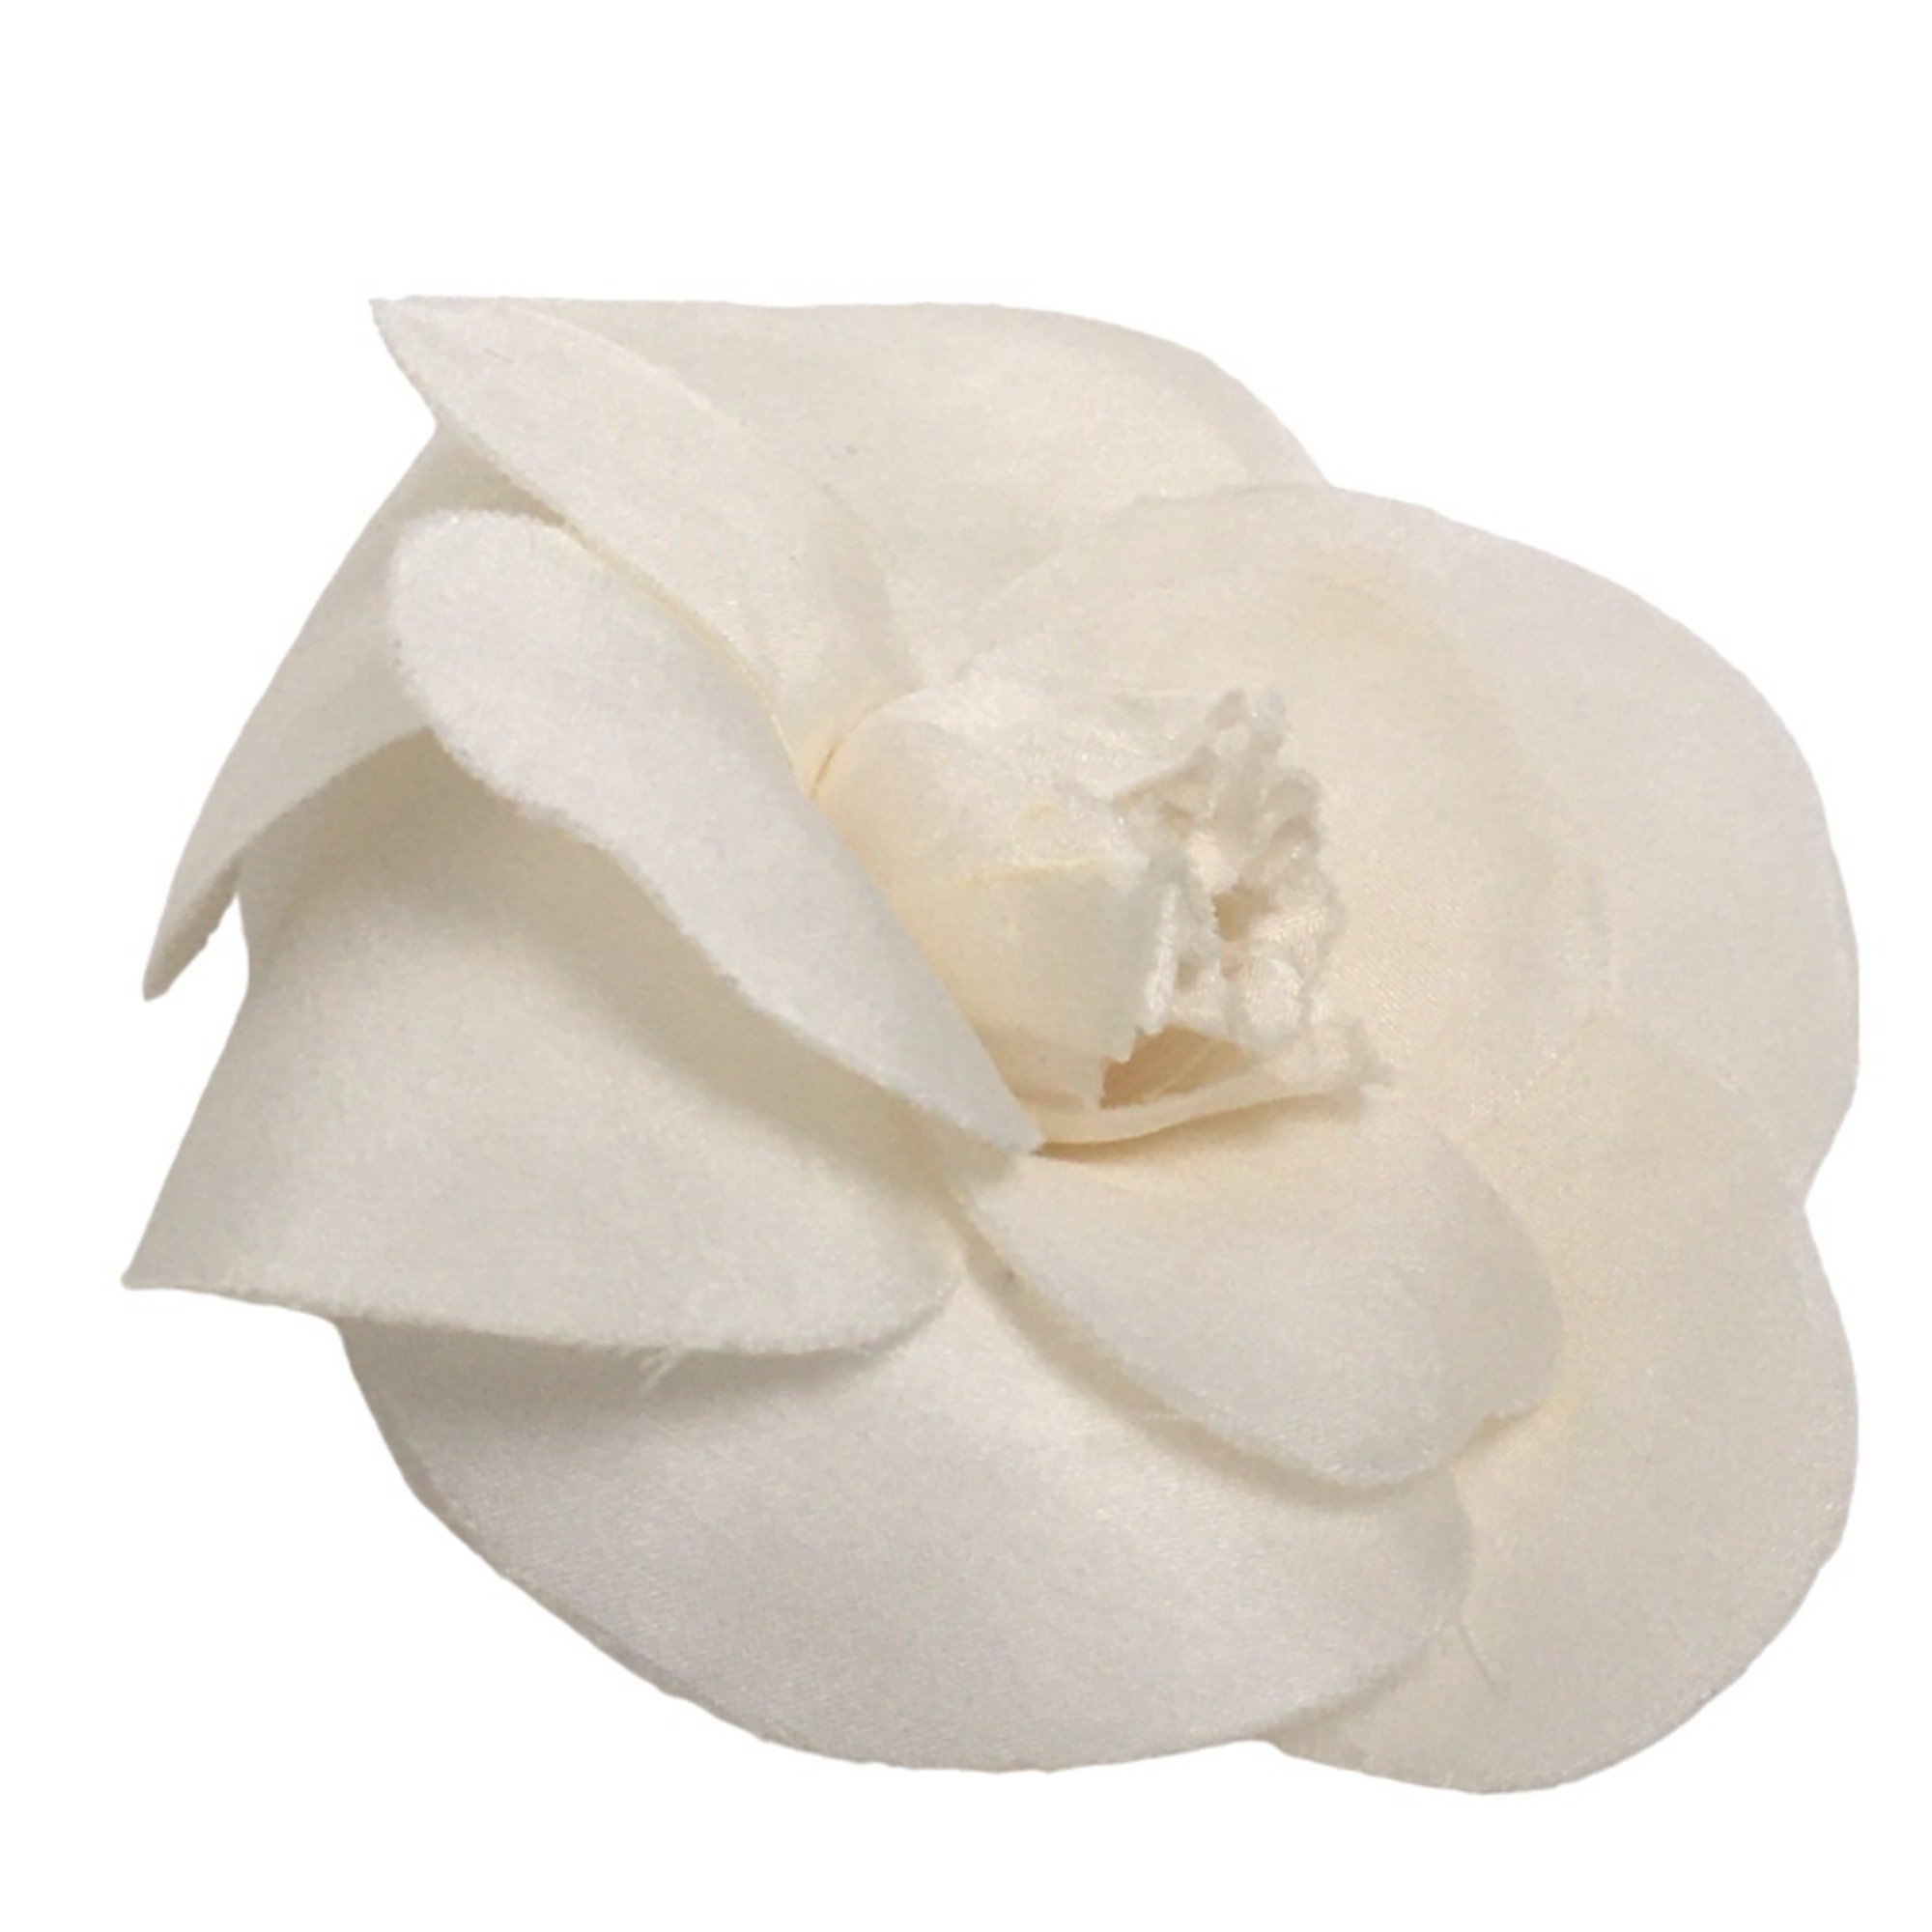 CHANEL Camellia with box corsage white brooch